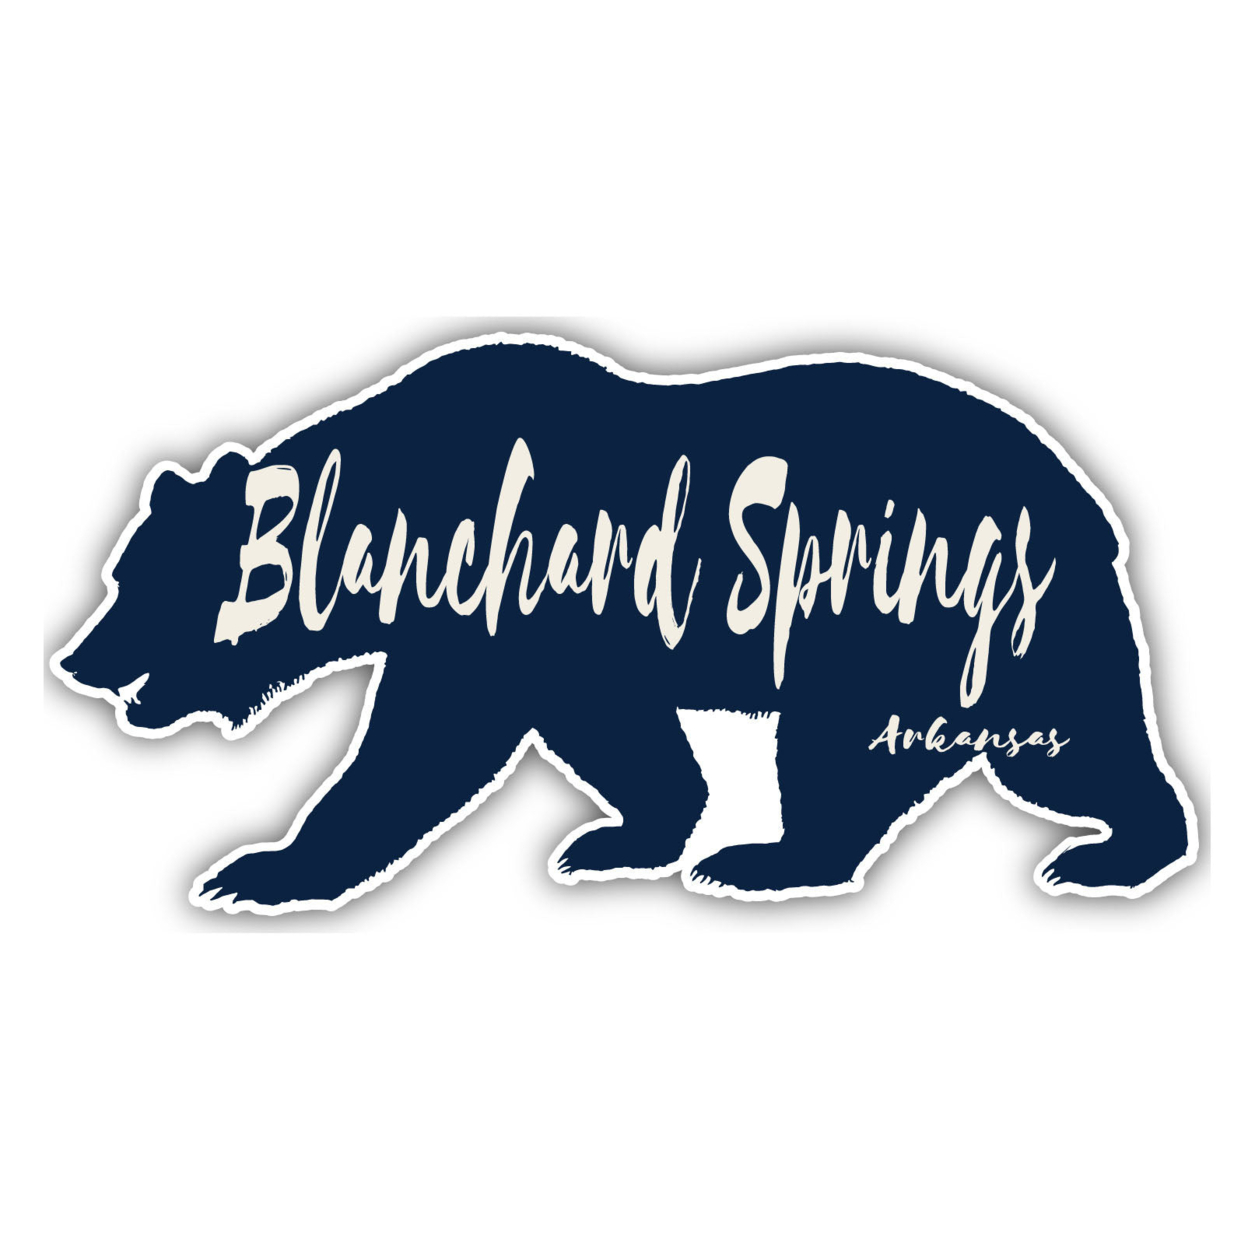 Blanchard Springs Arkansas Souvenir Decorative Stickers (Choose Theme And Size) - 4-Pack, 4-Inch, Bear